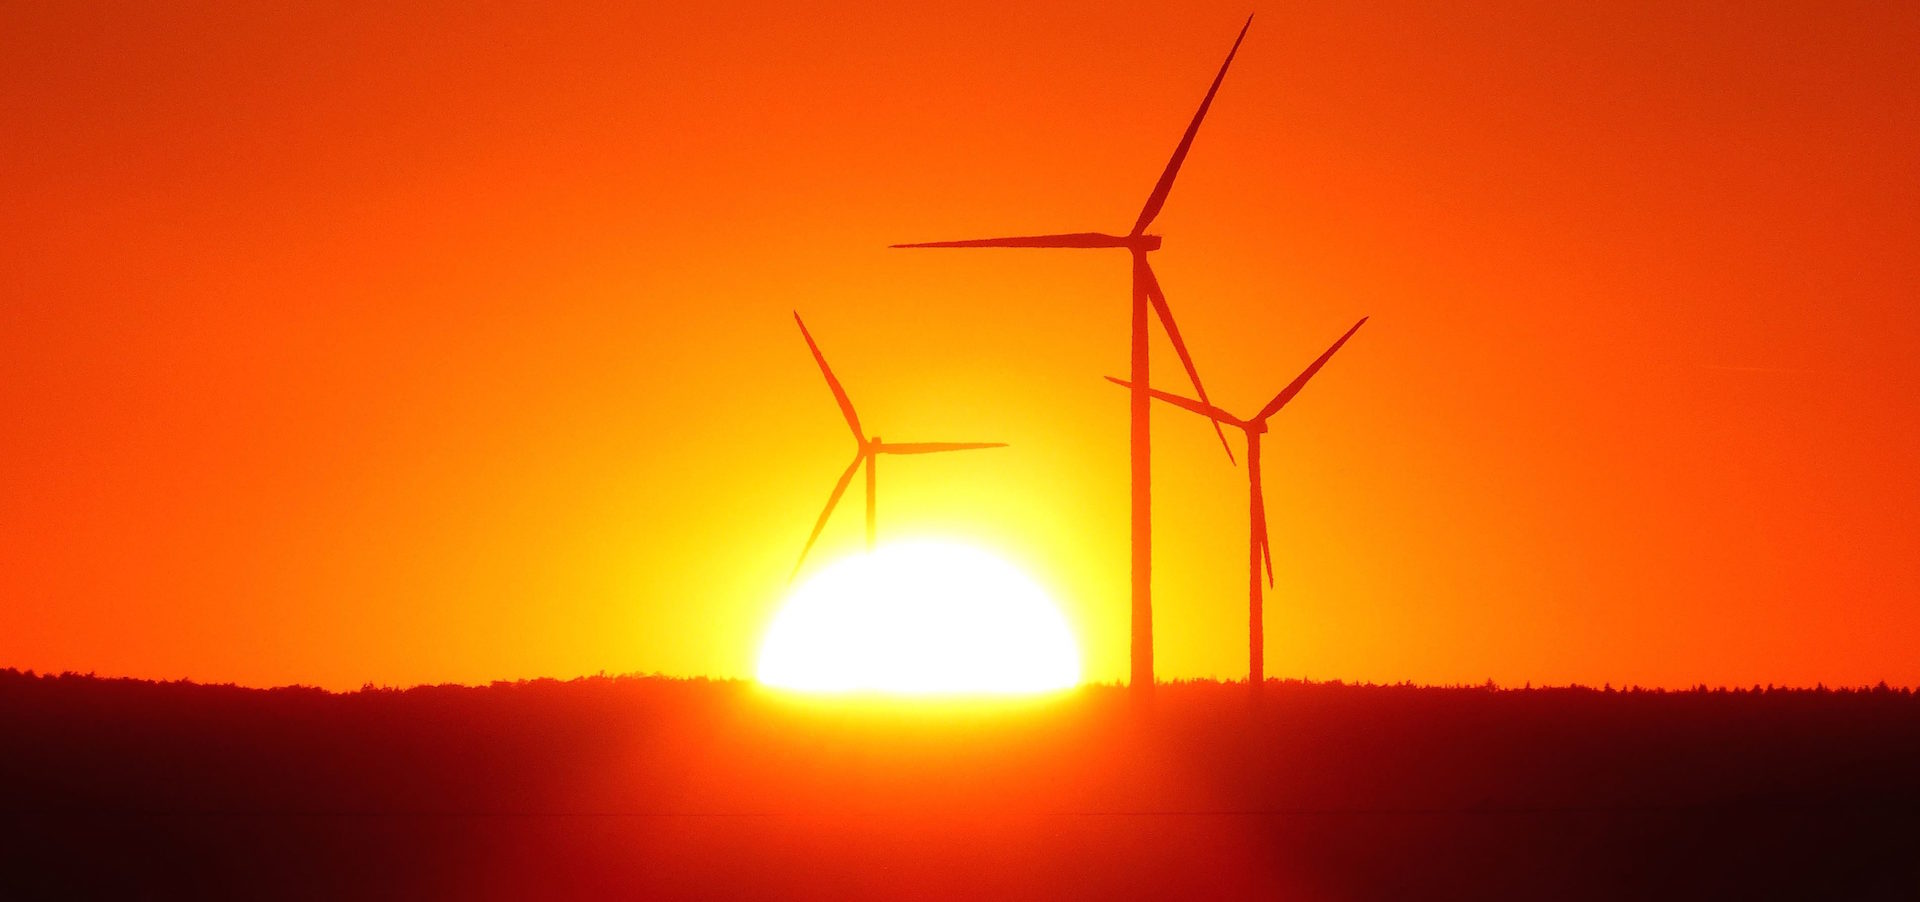 sunrise with three wind turbines in the foreground